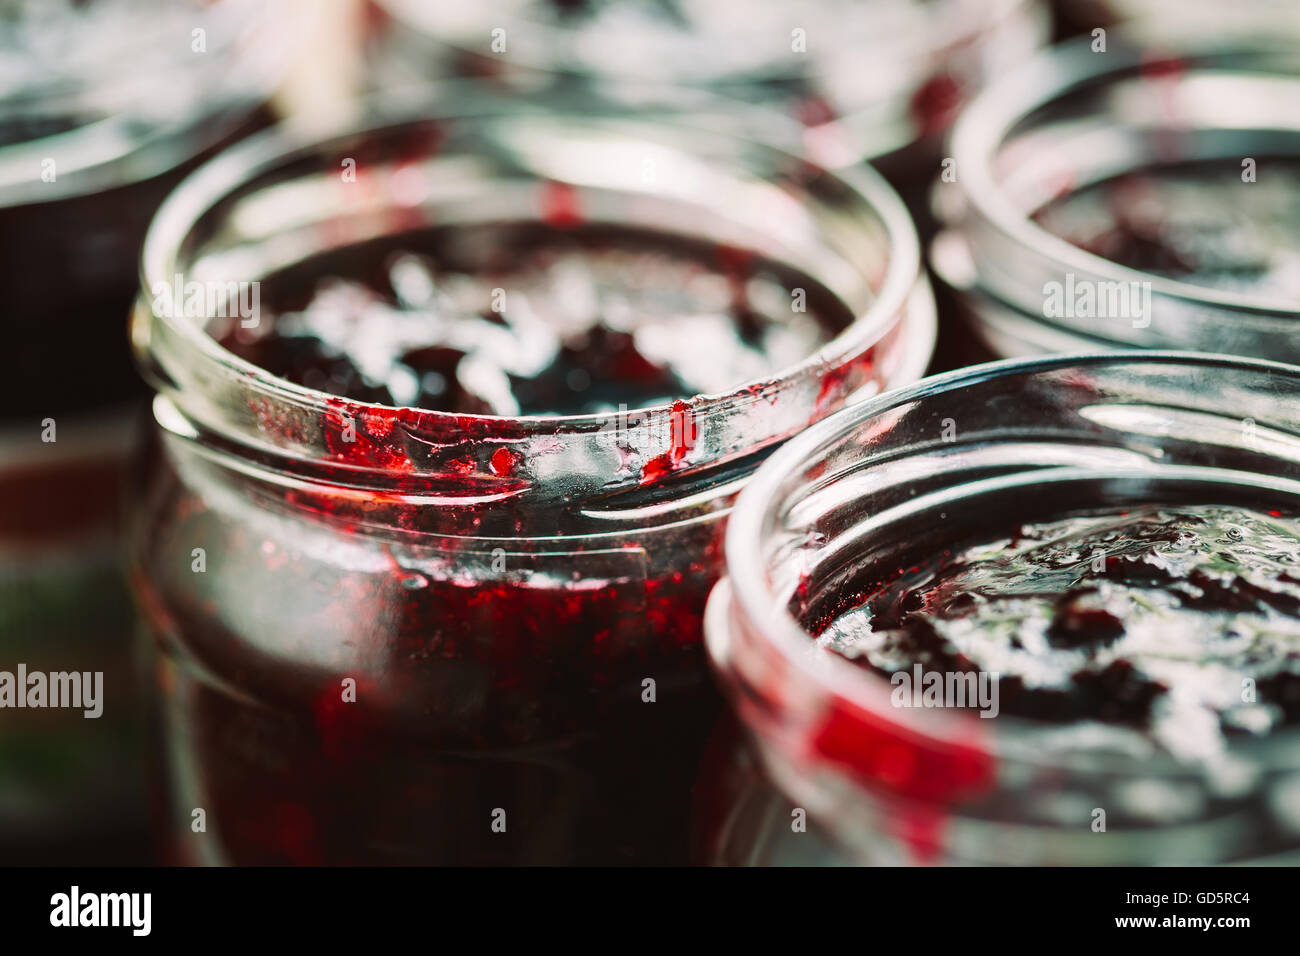 Close Up View Of Jars With Sweet Tasty Yummy Red Jam Stock Photo